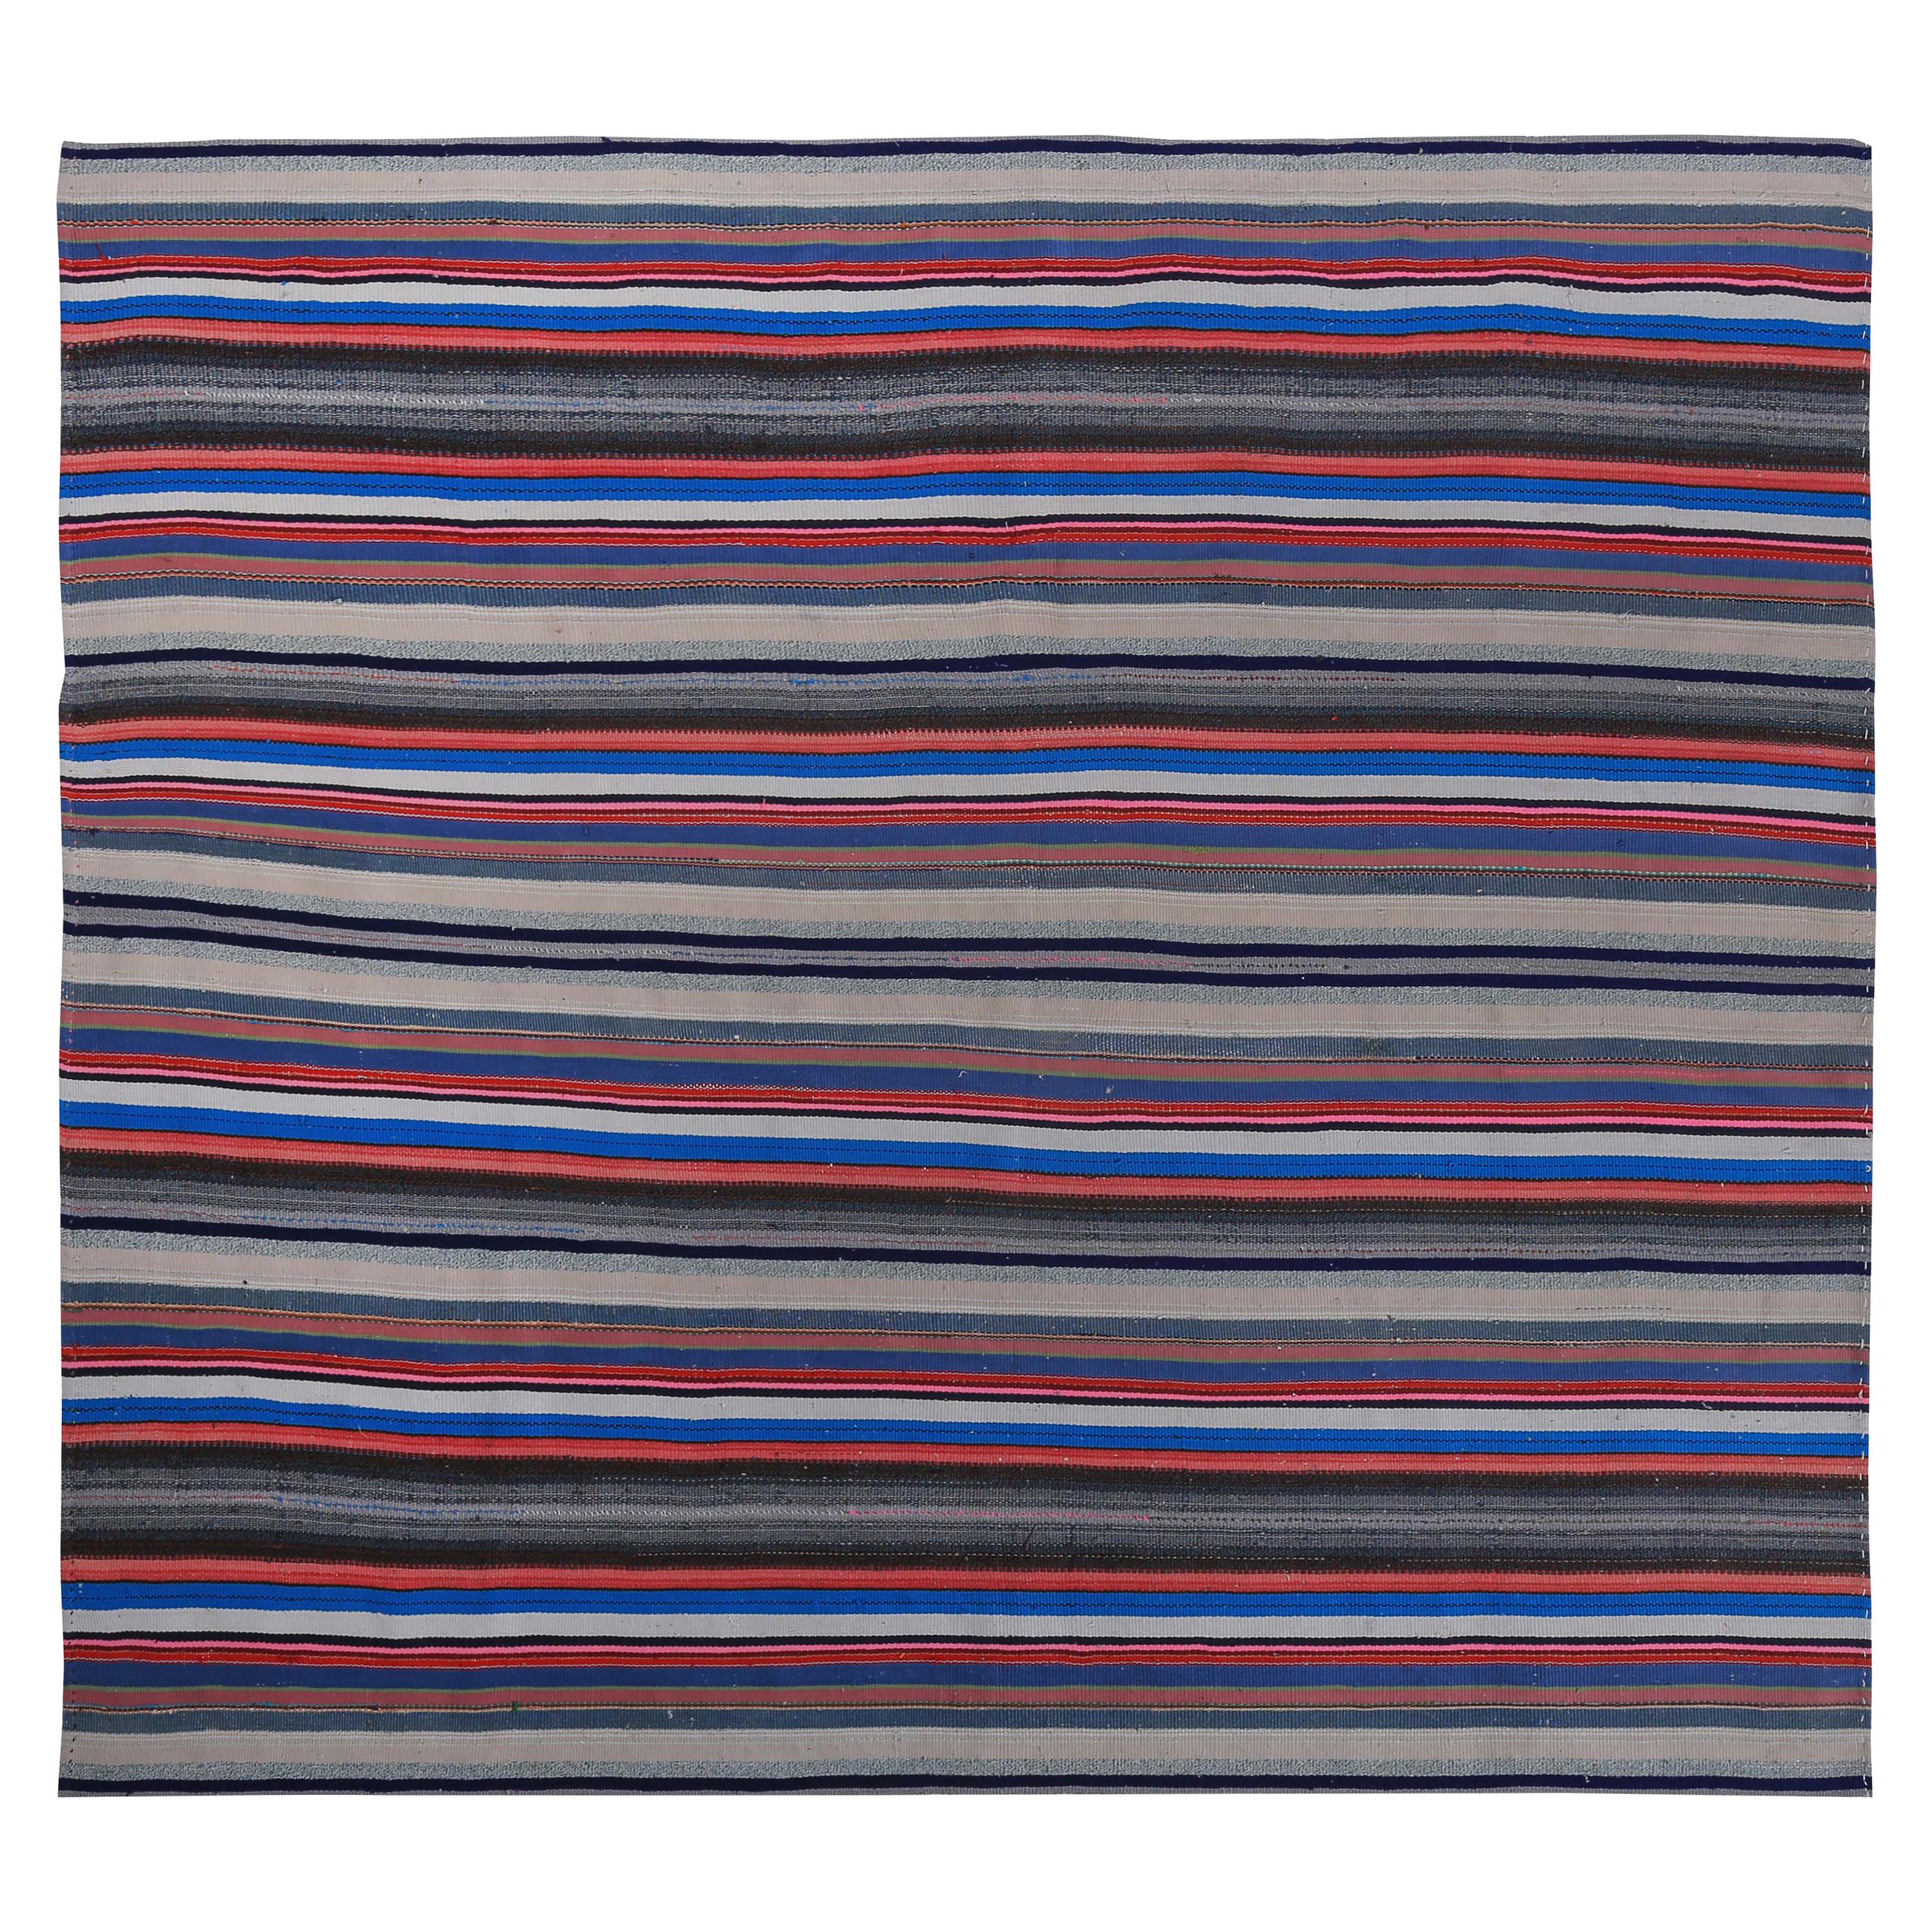 Turkish Kilim Rug with White, Blue and Red Stripes on Gray Field